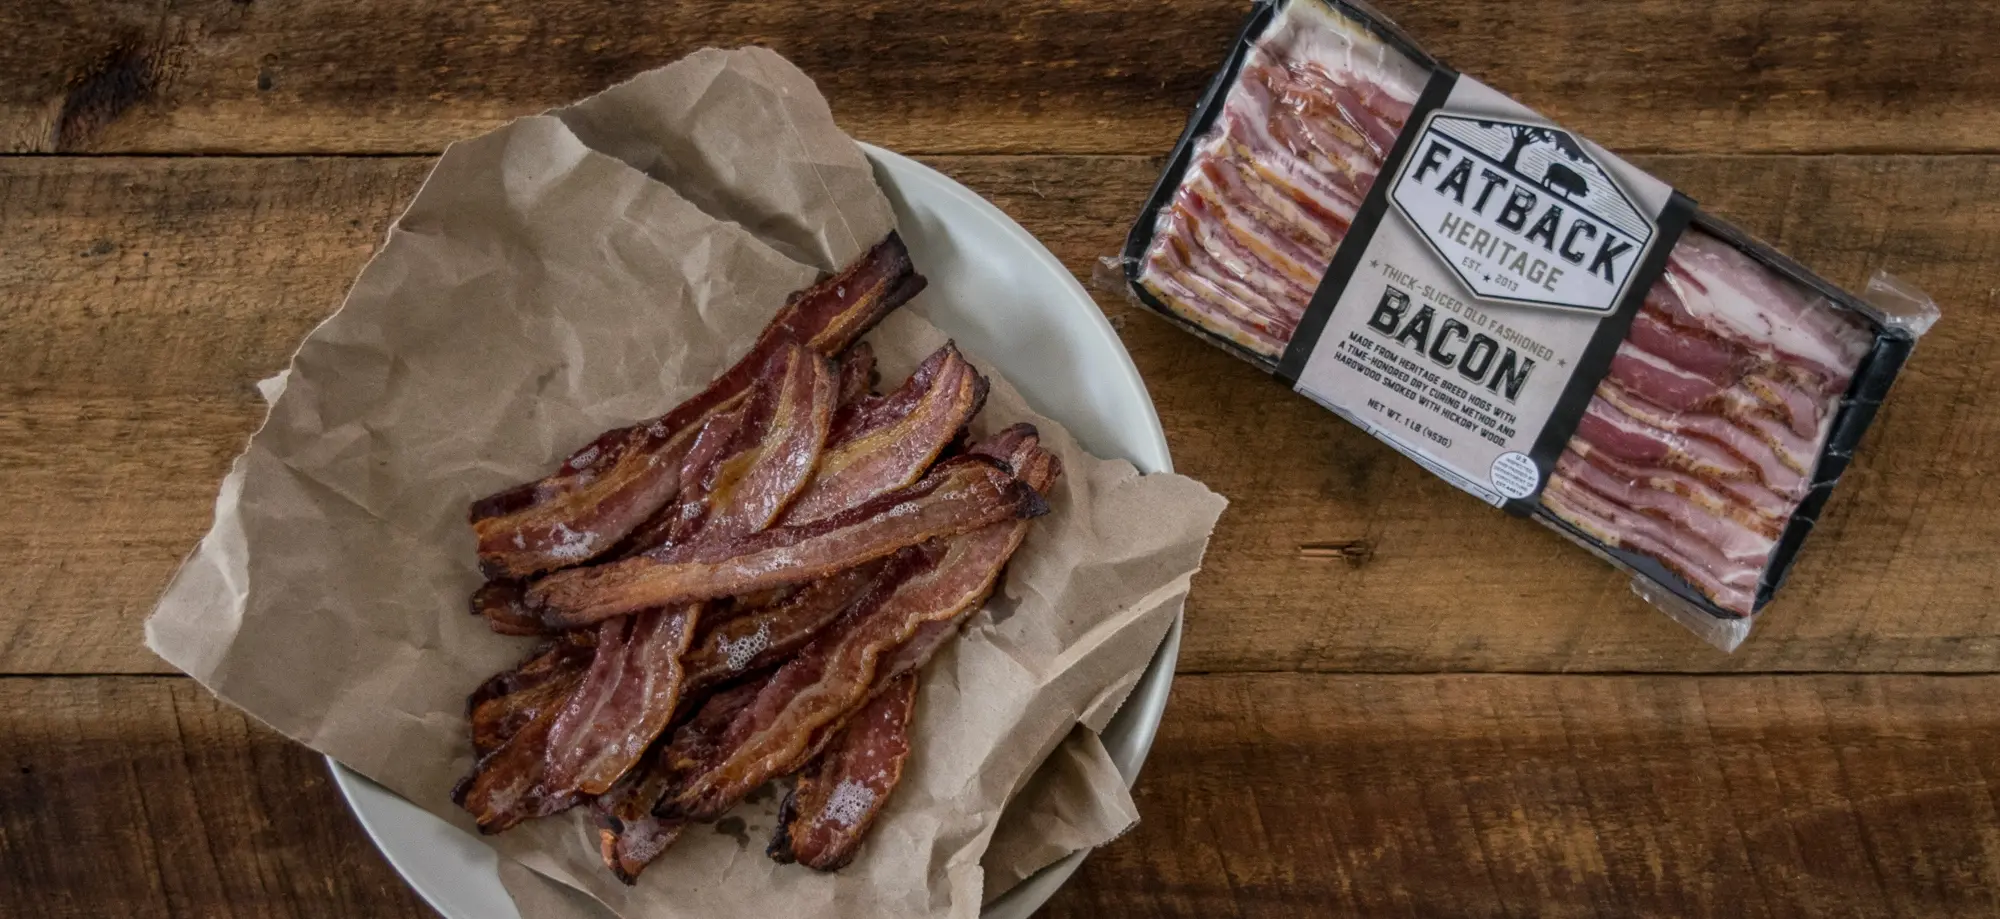 smoked fatback - What is fatback made of